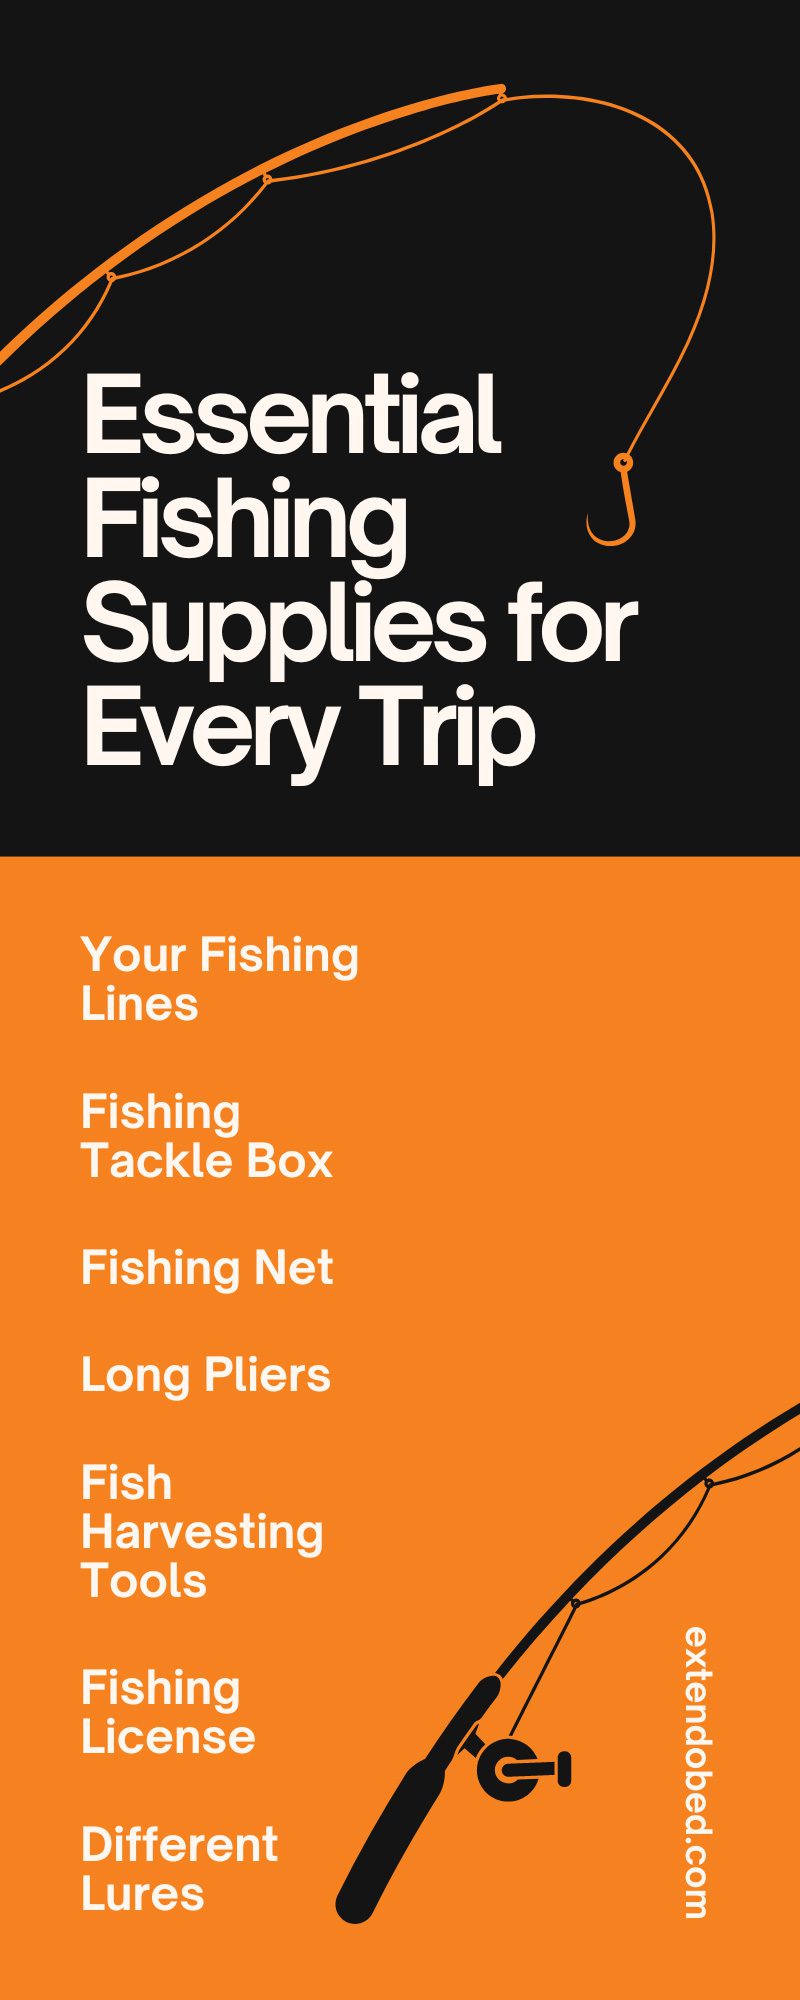 Essential Fishing Supplies for Every Trip